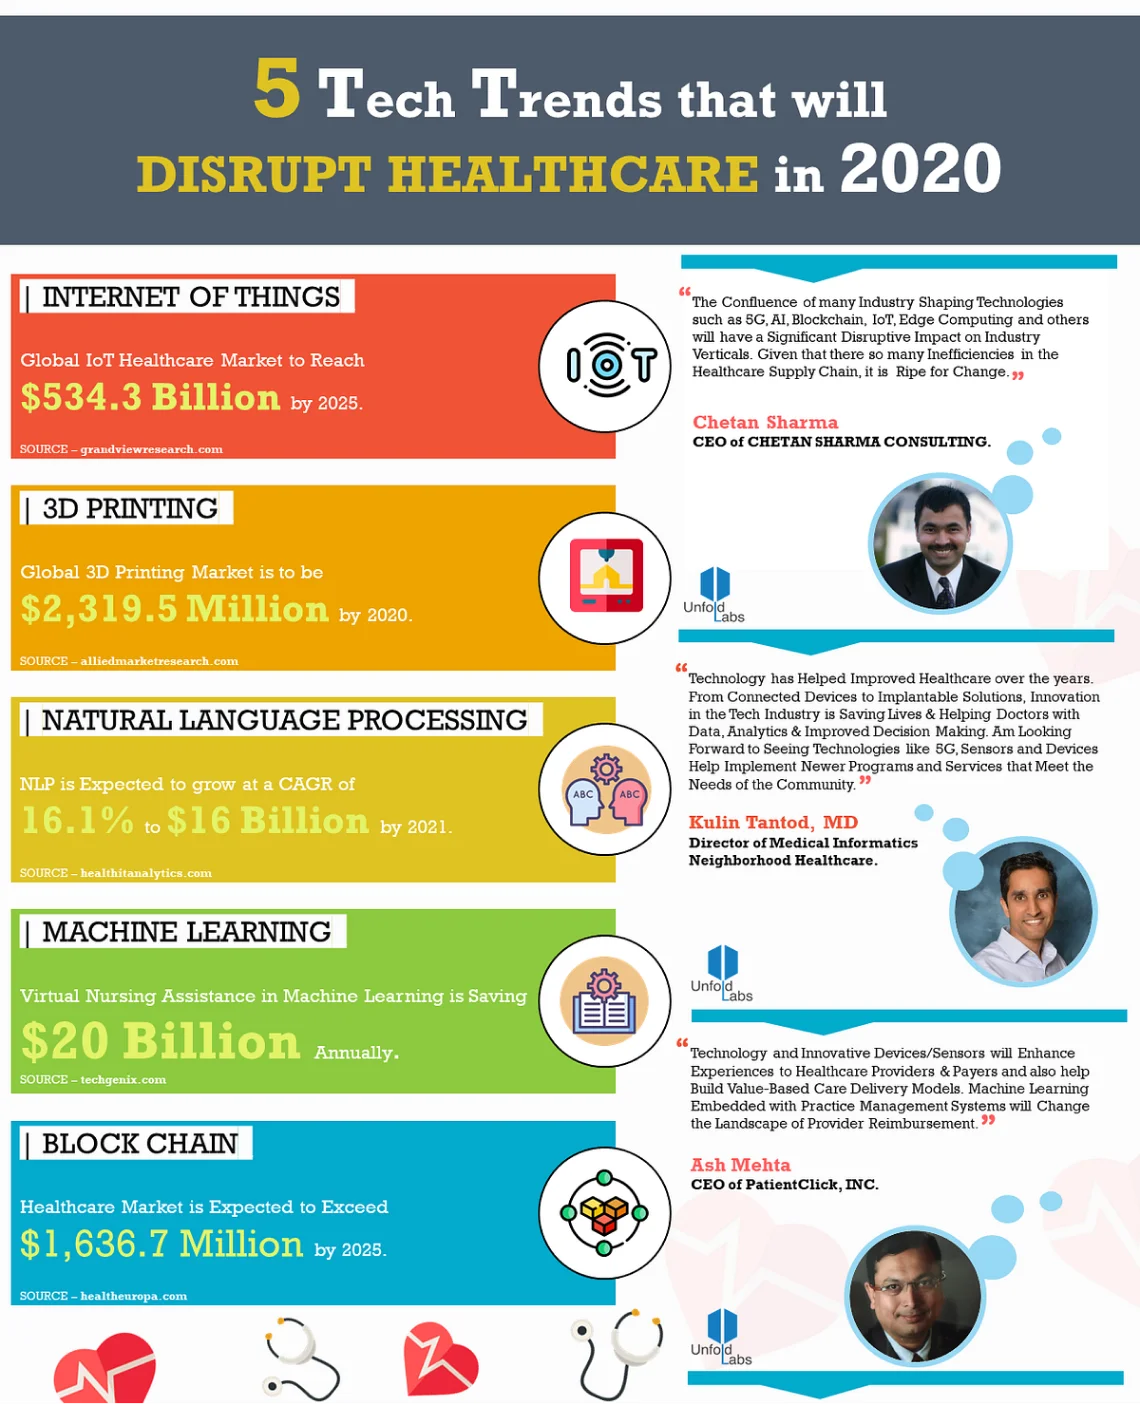 5 Tech Trends that will disrupt healthcare